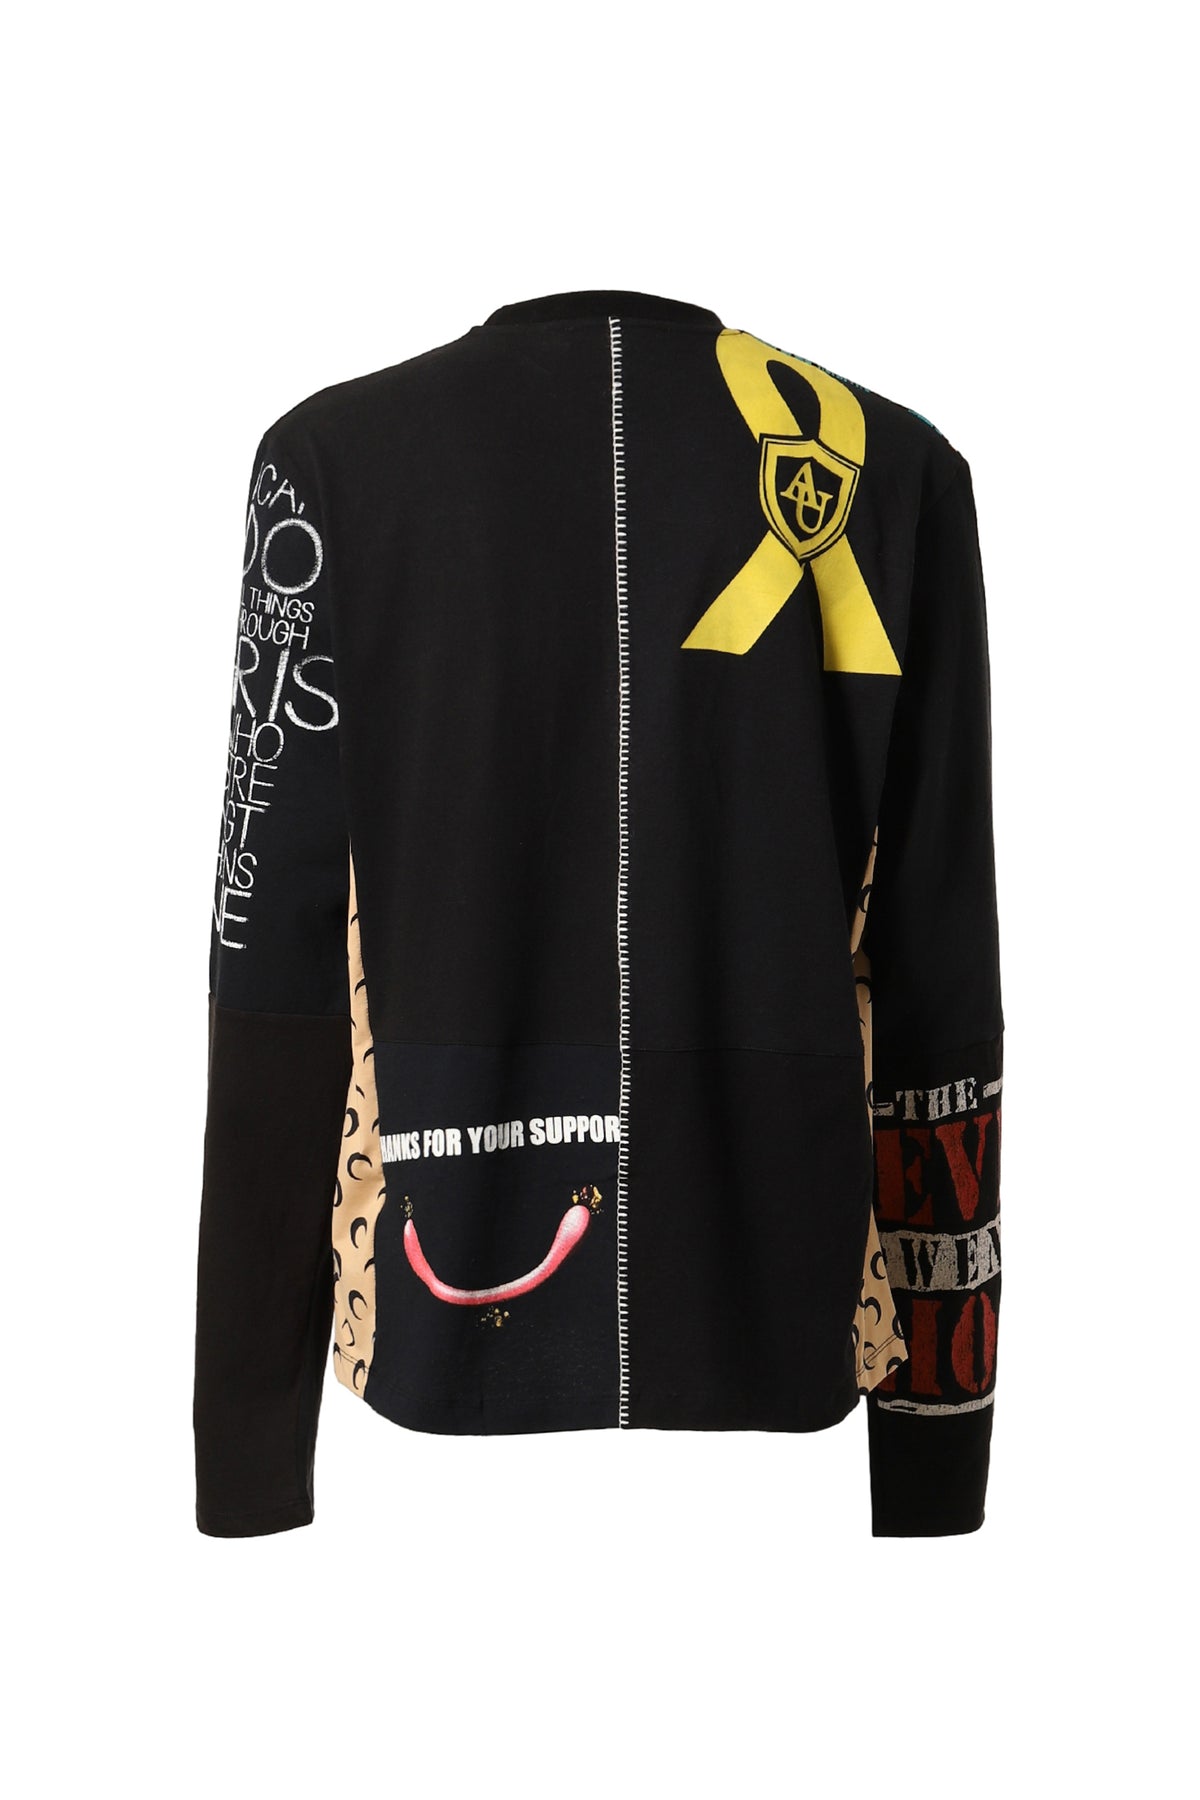 REGENERATED GRAPHIC T-SHIRT LONG SLEEVES T-SHIRT / BLK